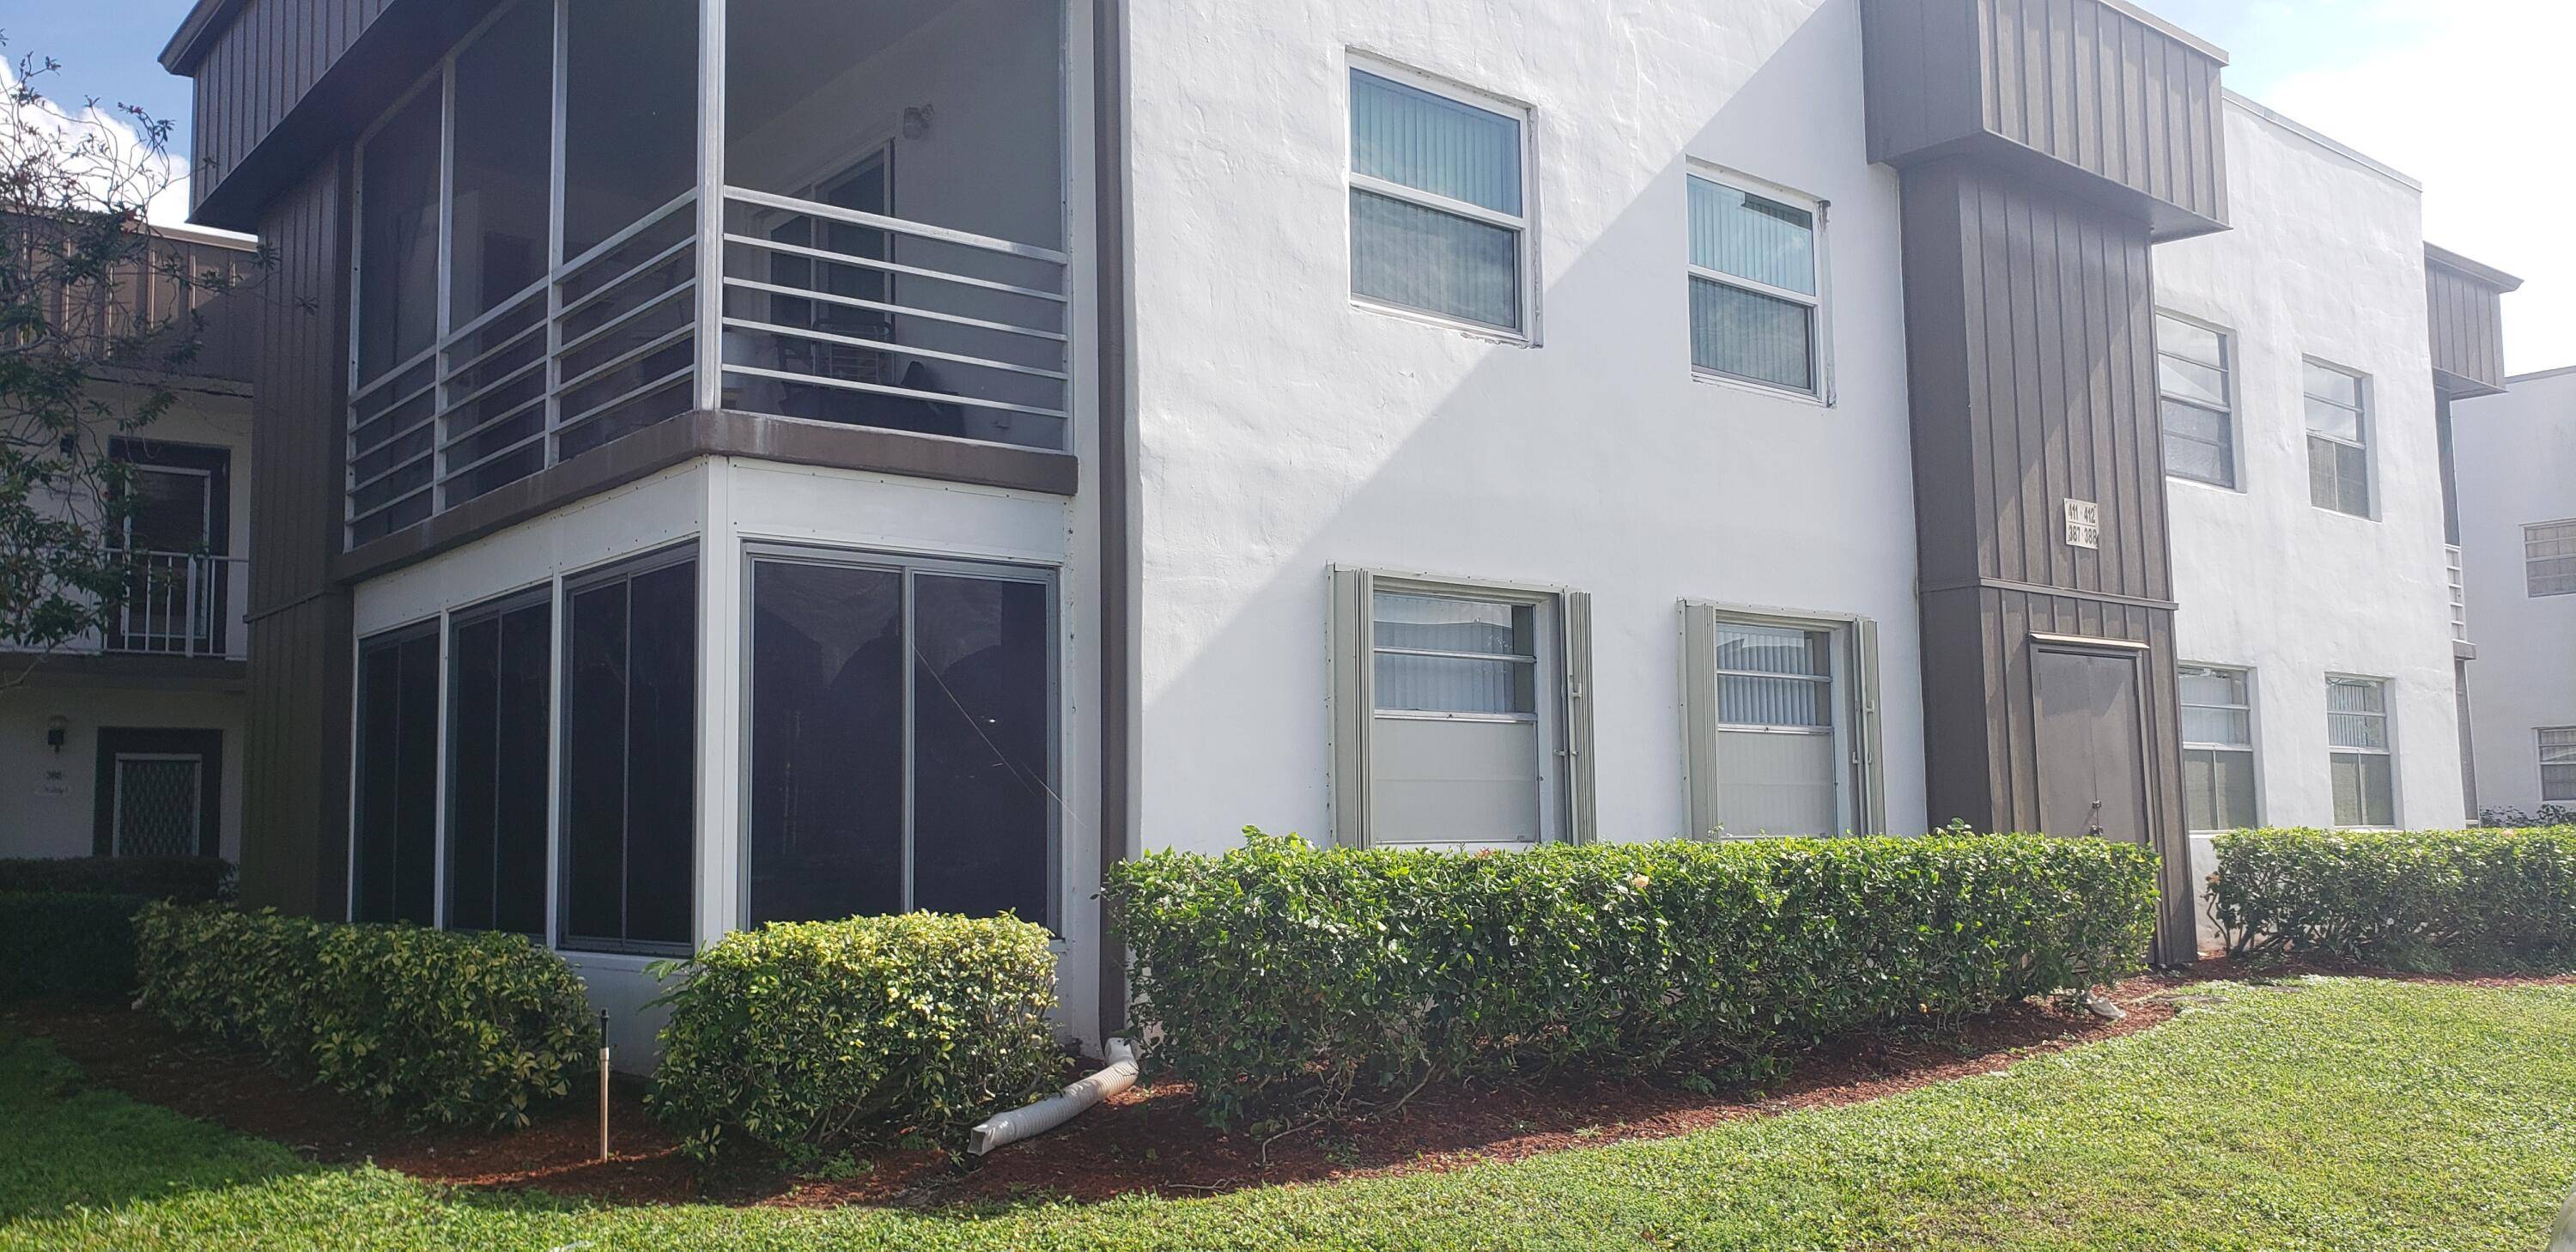 Immaculate 1st Floor True End Unit 2 Bedroom 2 Bath with Florida at Kings Point Delray's Premier Active 55 Community.